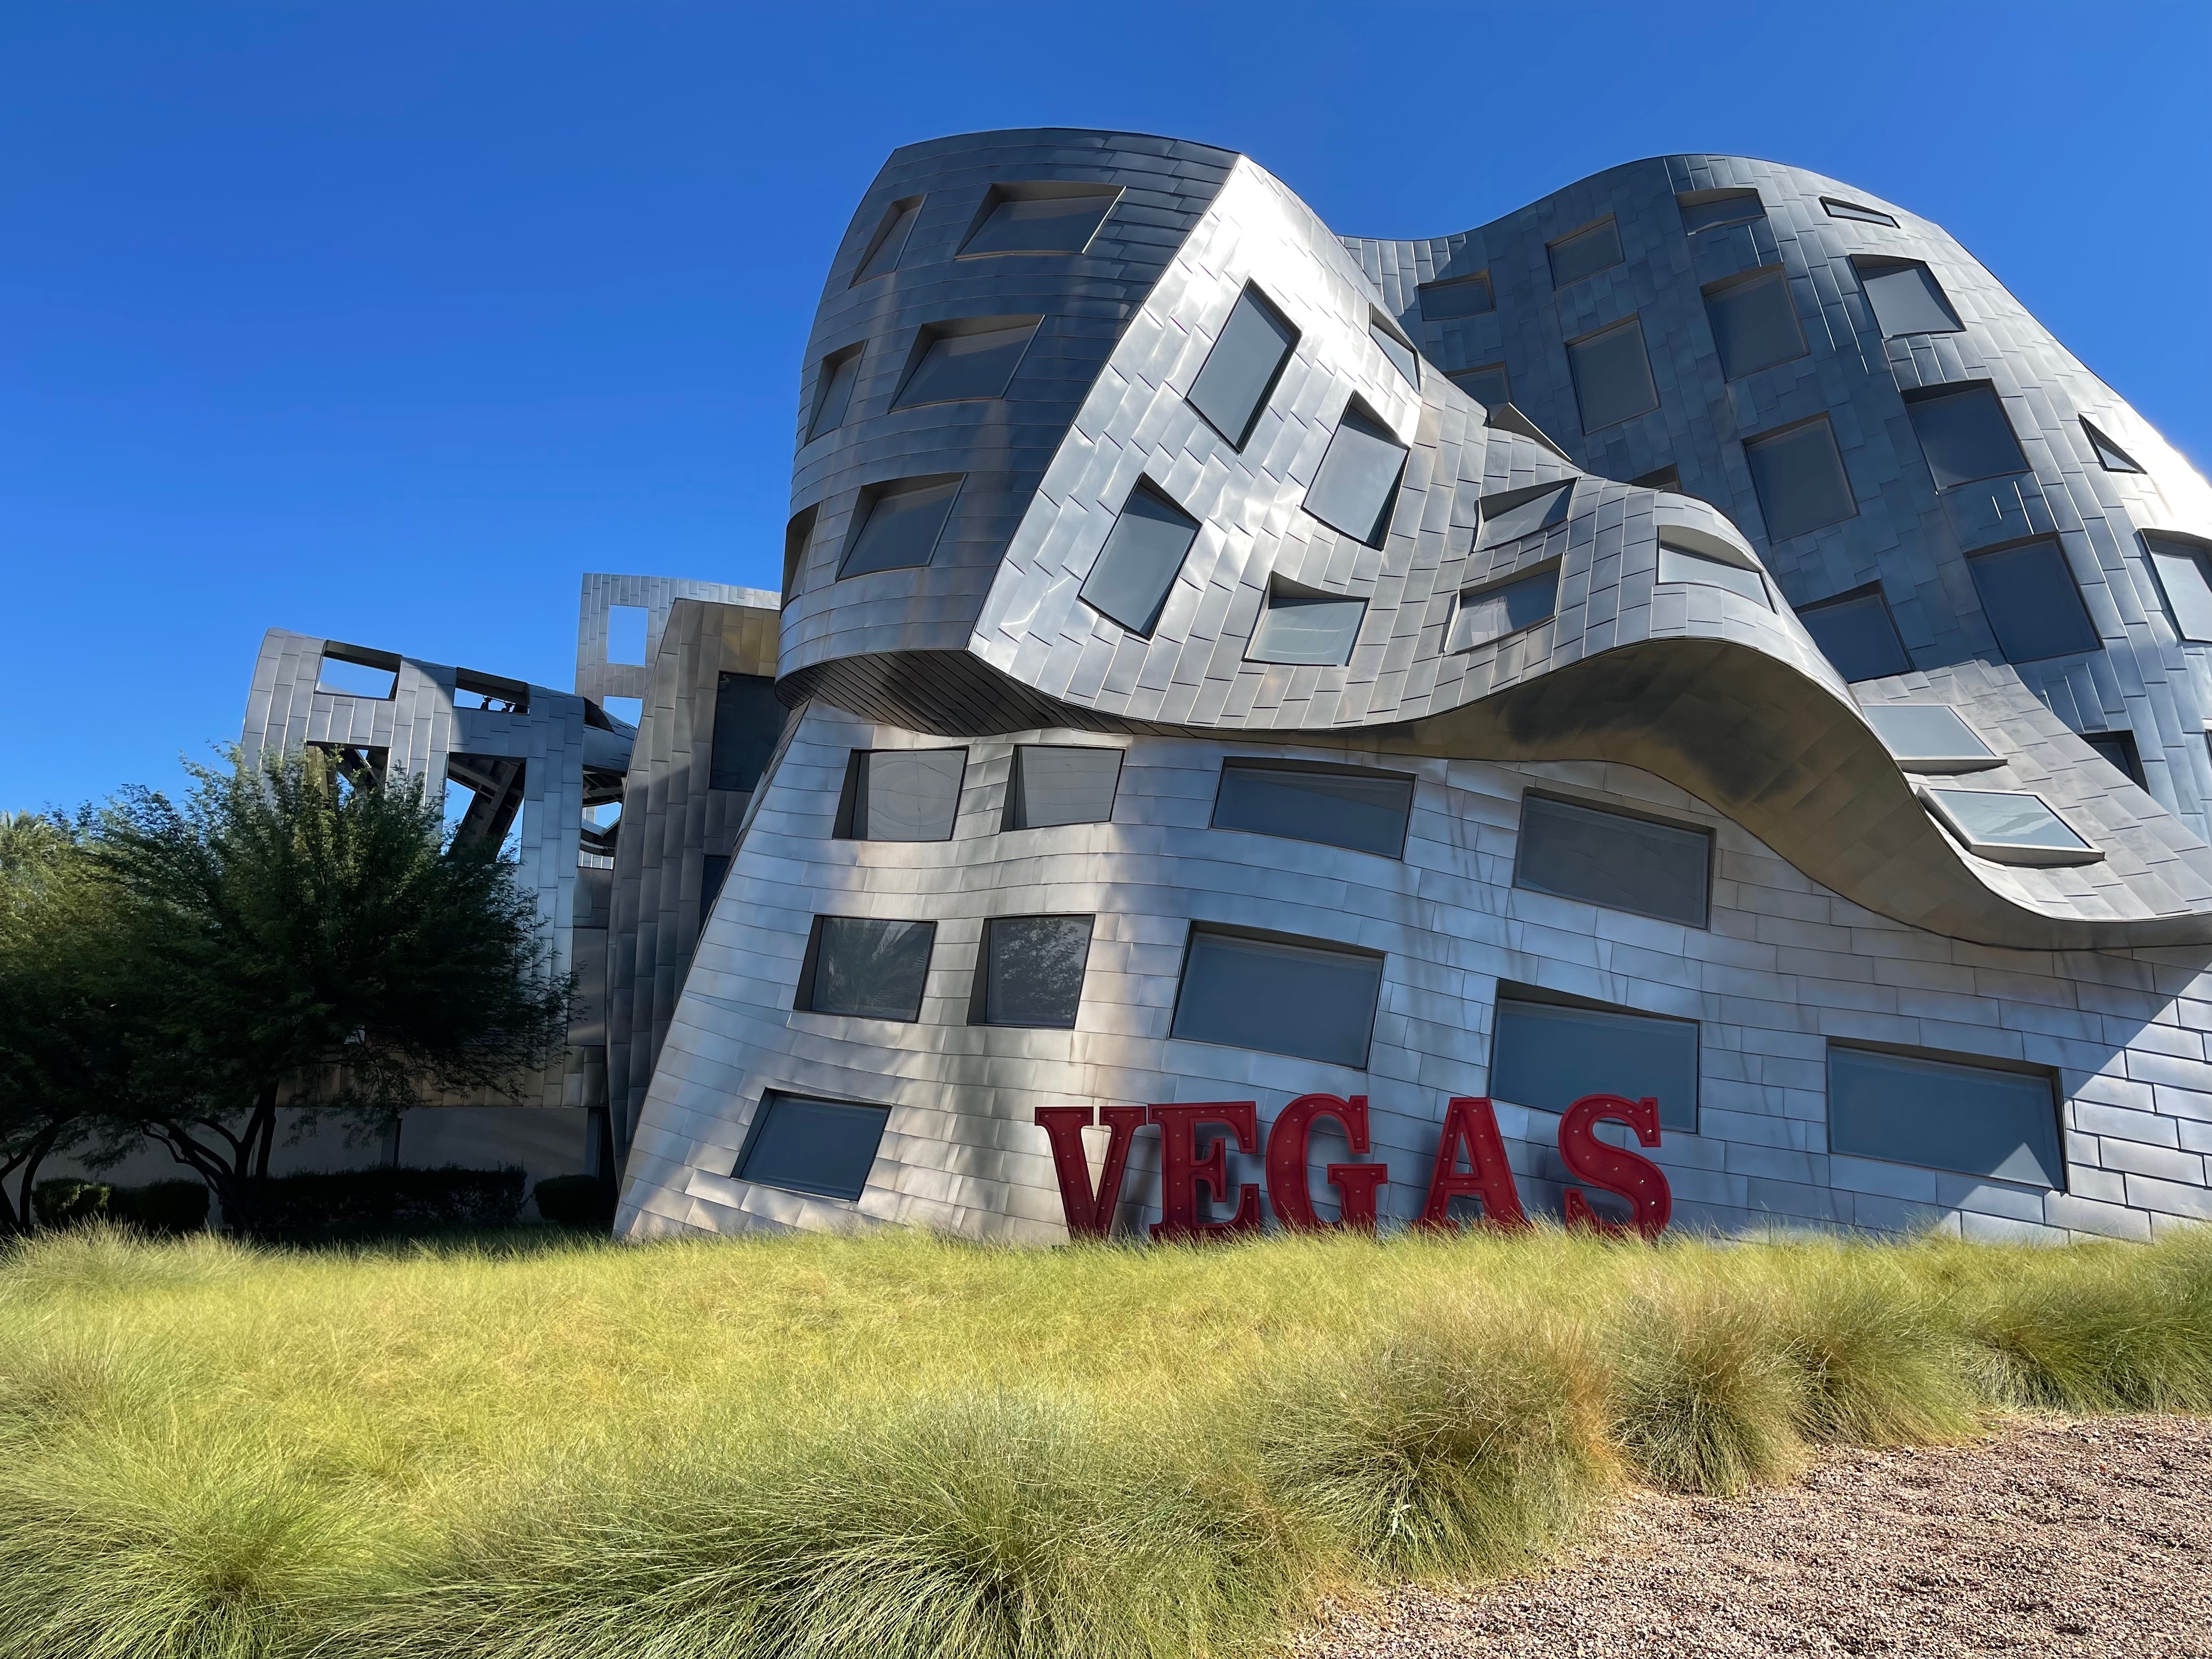 The crazy looking Keep Memory Alive building in Vegas designed by Frank Gehry